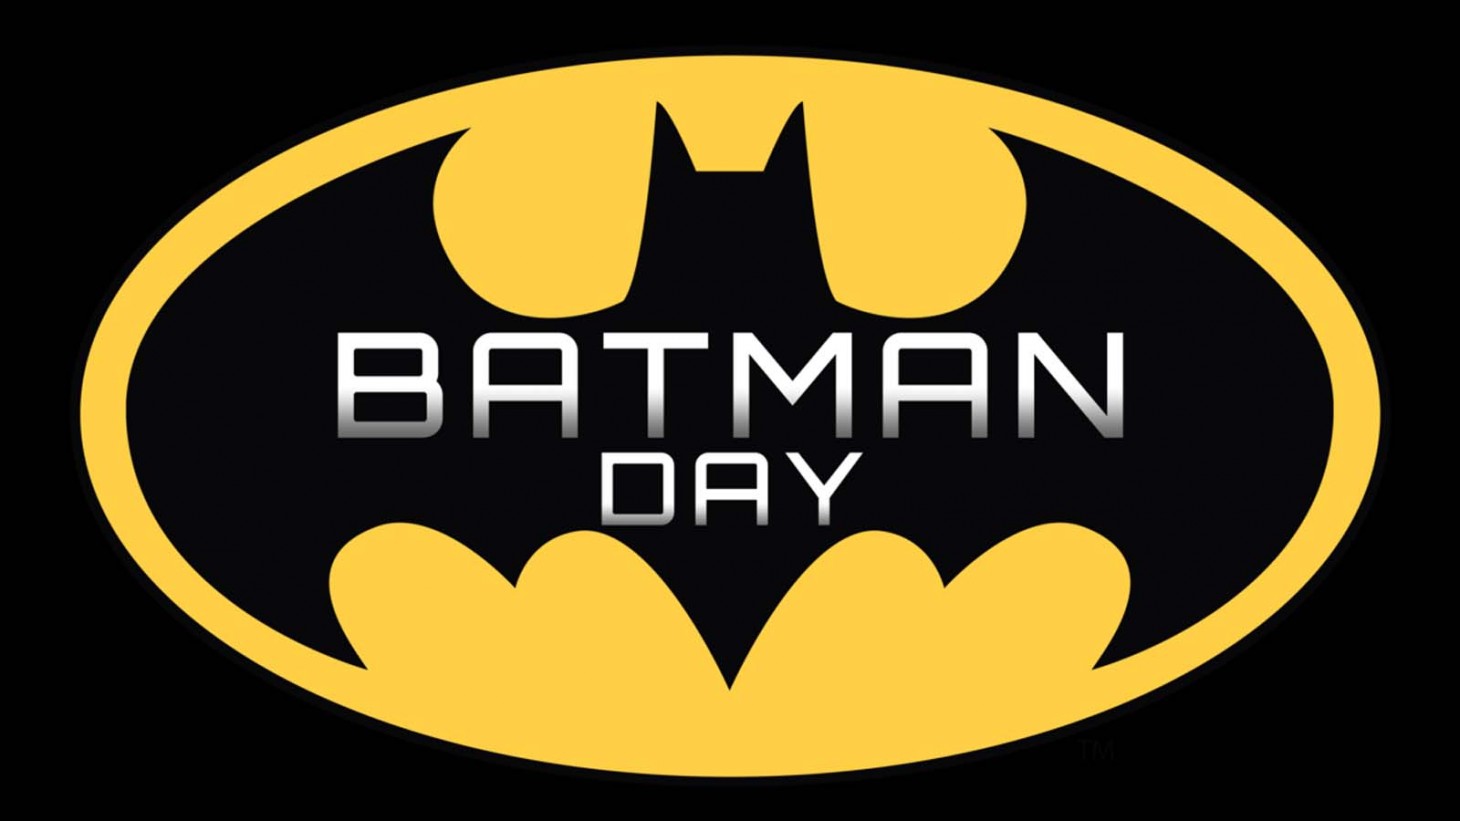 Celebrate The Caped Crusader On Batman Day This Saturday - Game Informer